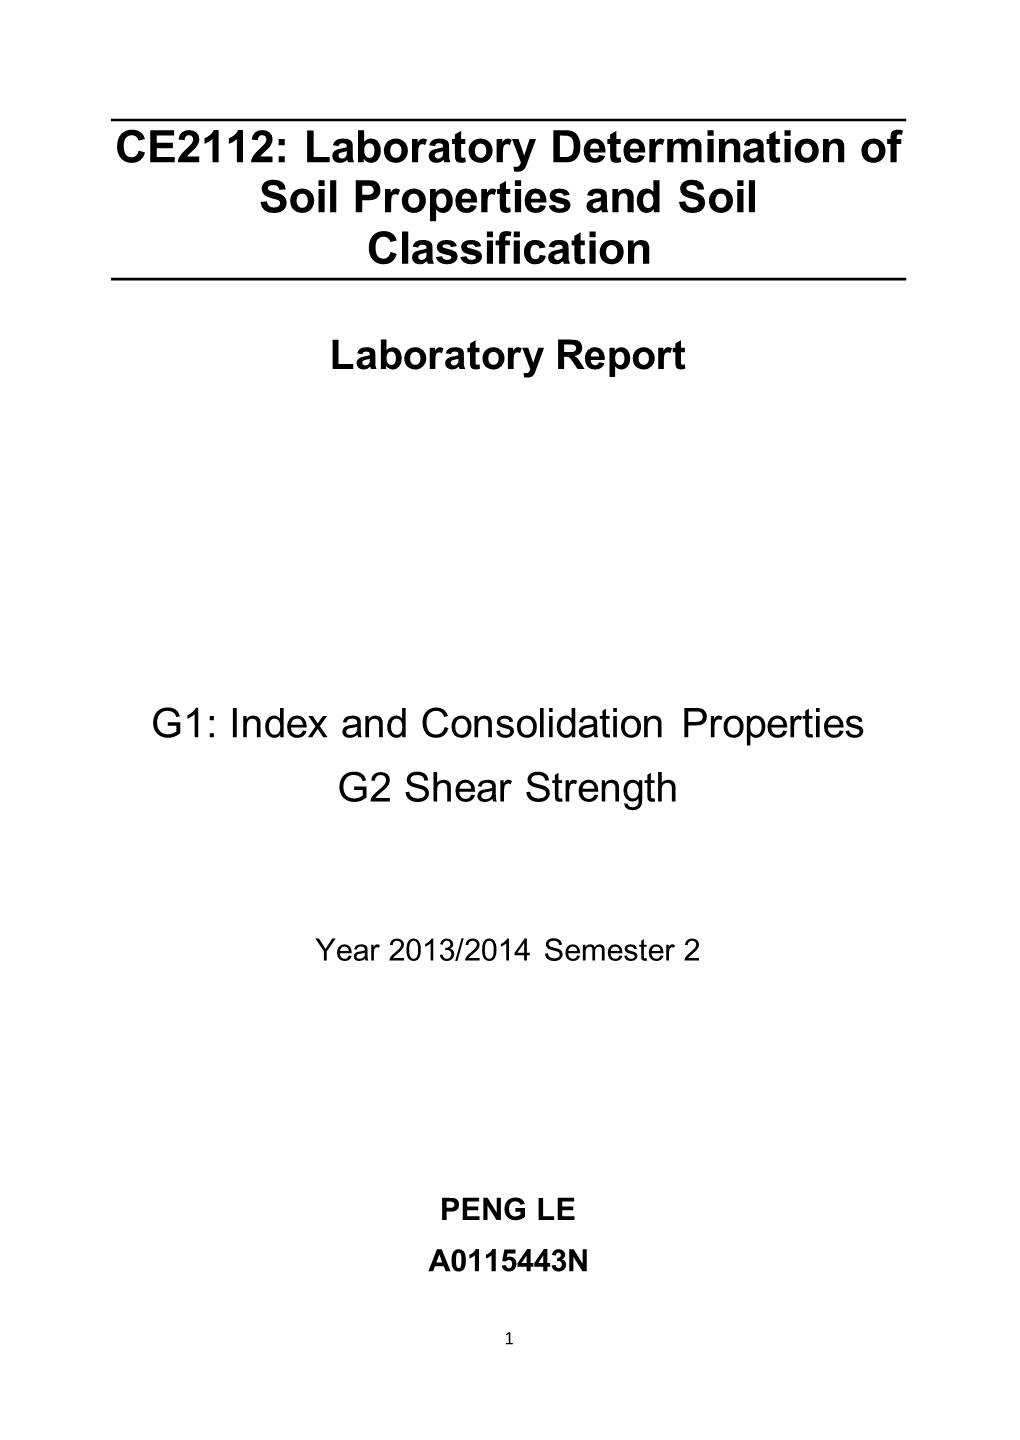 CE2112: Laboratory Determination of Soil Properties and Soil Classification